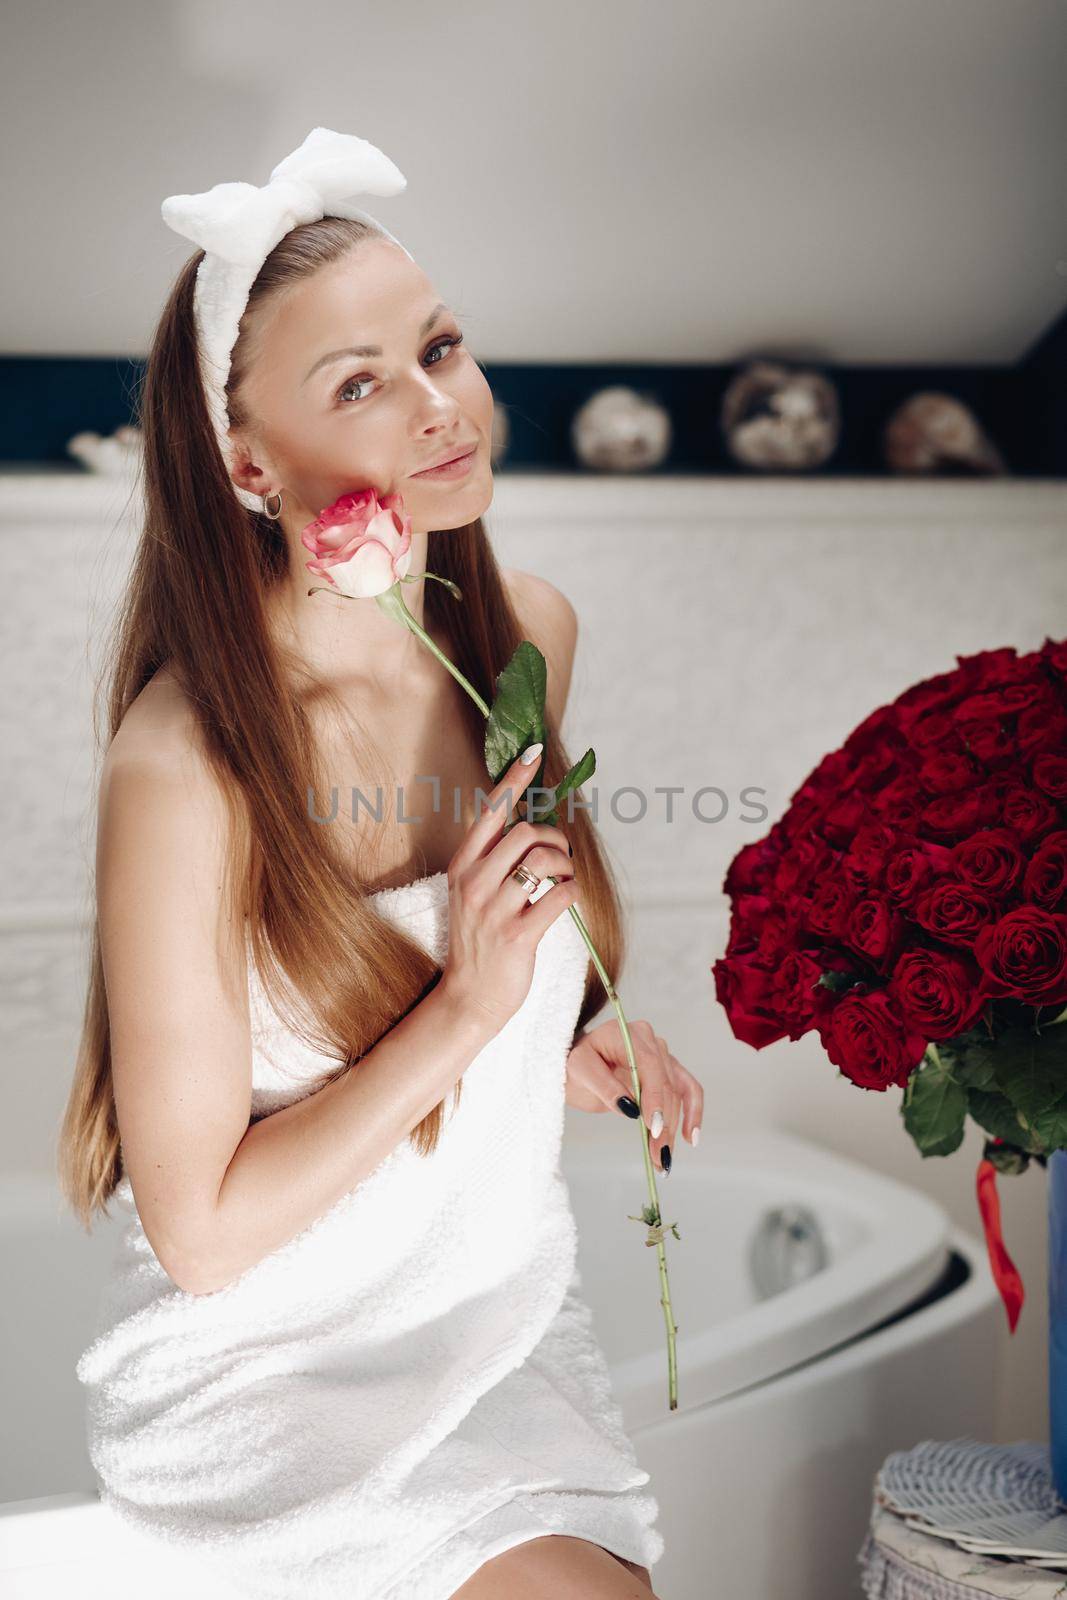 Brunette girl with long hair sitting on bath after morning shower. Pretty lady in white towel looking up and holding flower. Young woman getting bouquet of roses and thinking about boyfriend.